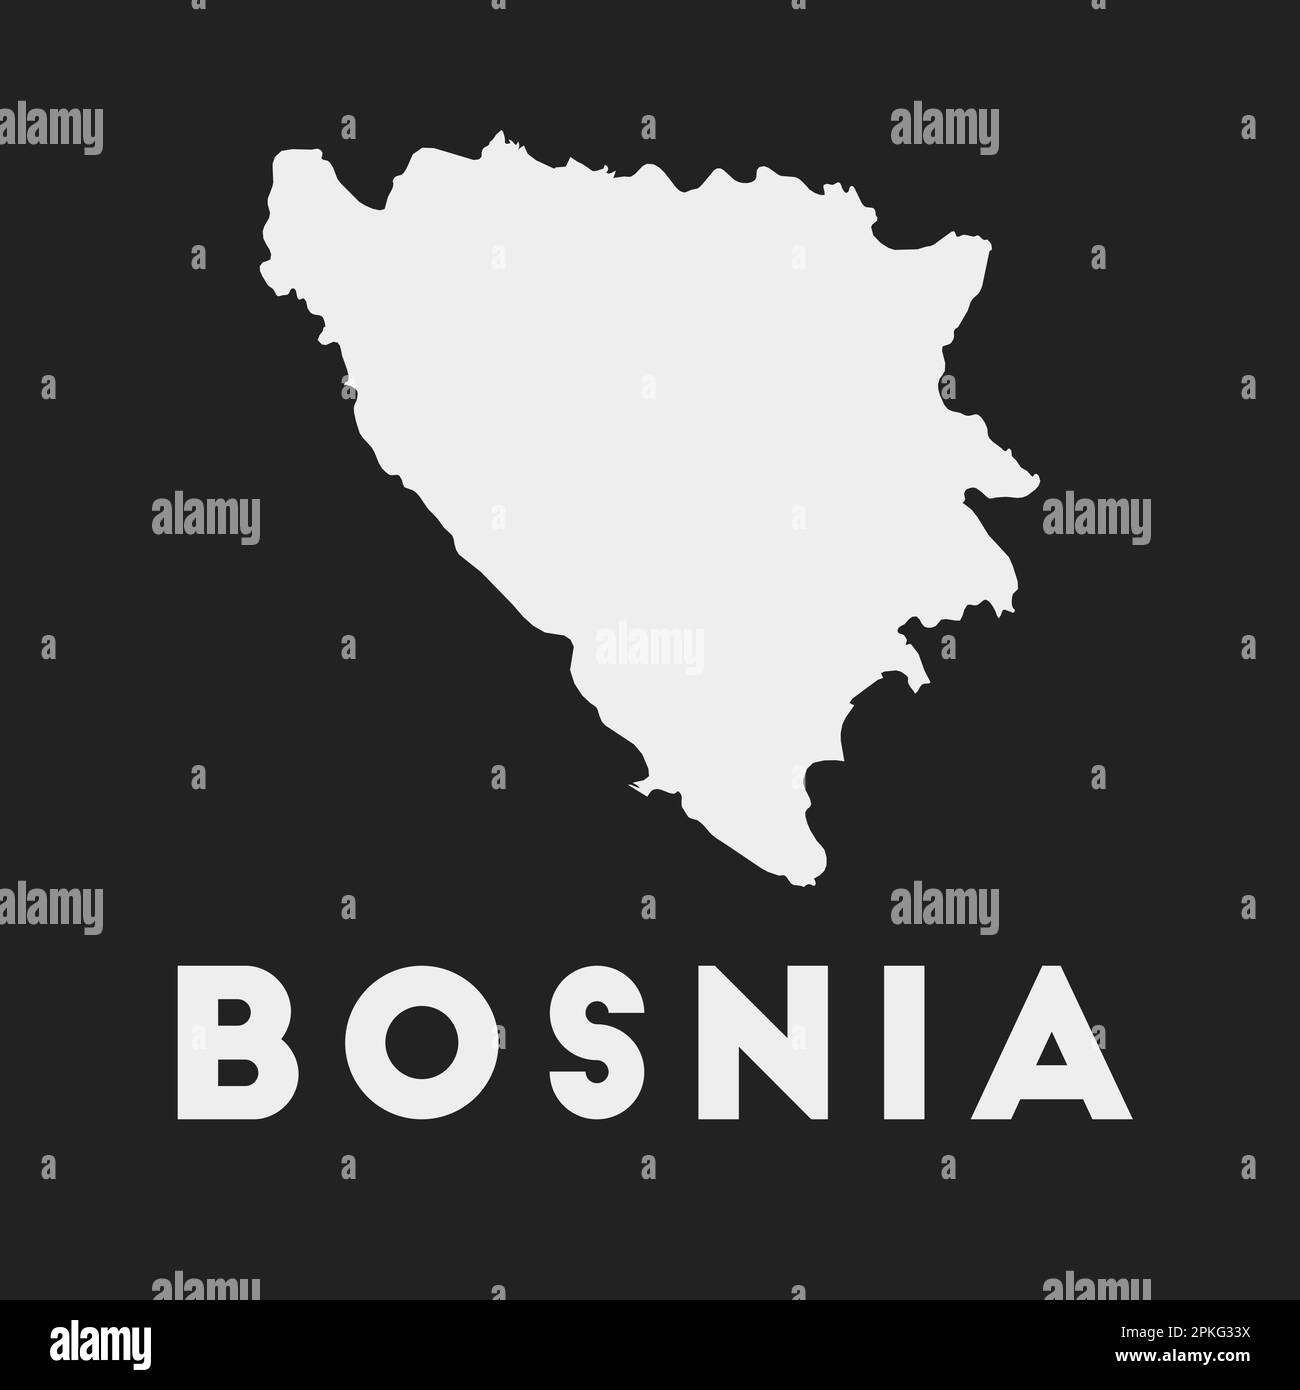 Bosnia icon. Country map on dark background. Stylish Bosnia map with country name. Vector illustration. Stock Vector